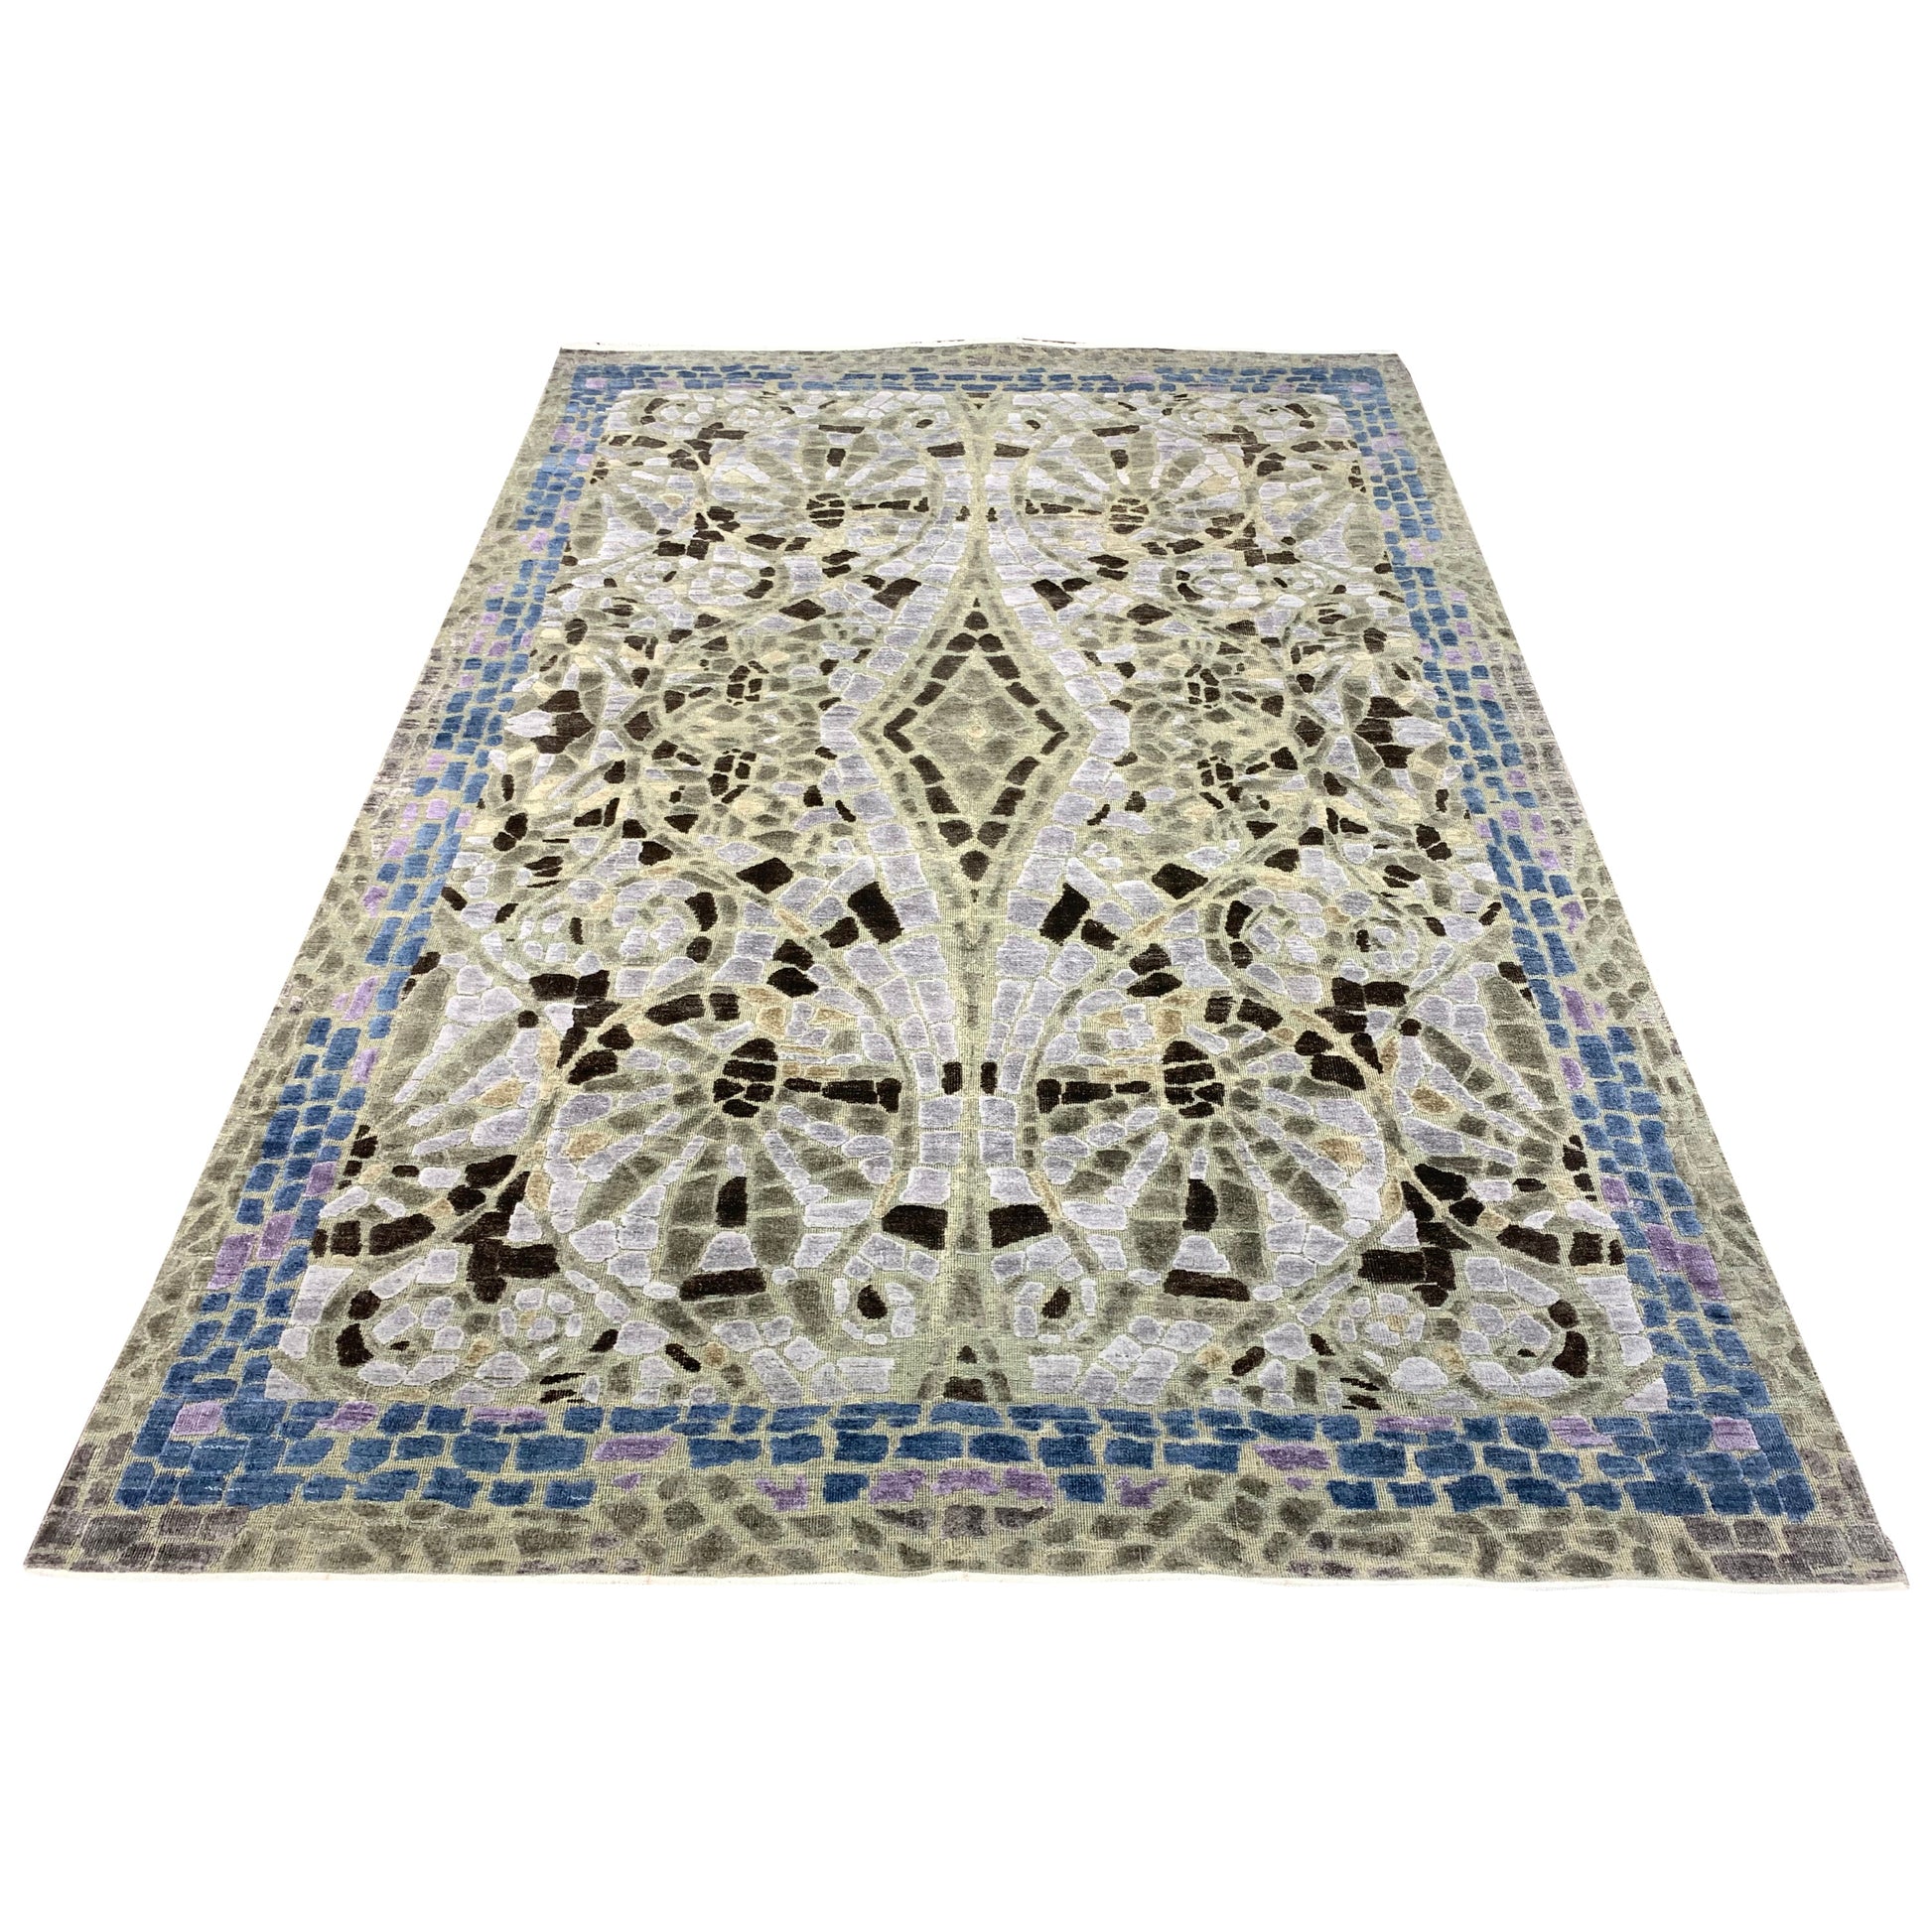 Get trendy with Grey Silk, Wool Modern Area Rug 6.0x9.3ft 183x281Cms - Modern Rugs available at Jaipur Oriental Rugs. Grab yours for $2999.00 today!